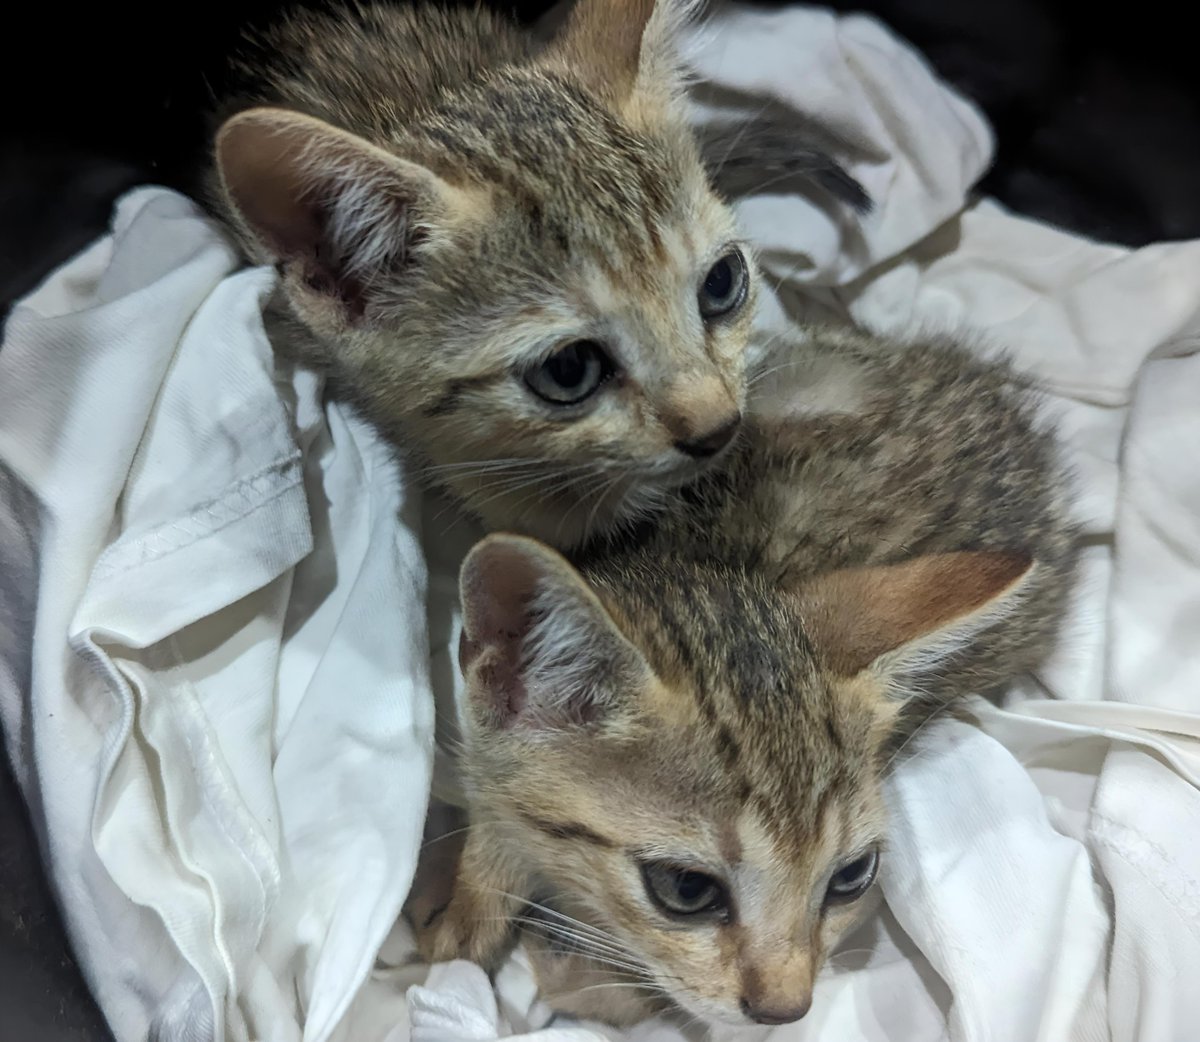 I got these two cute cats yesterday. I need Yorùbá names for them. PS: They're both female